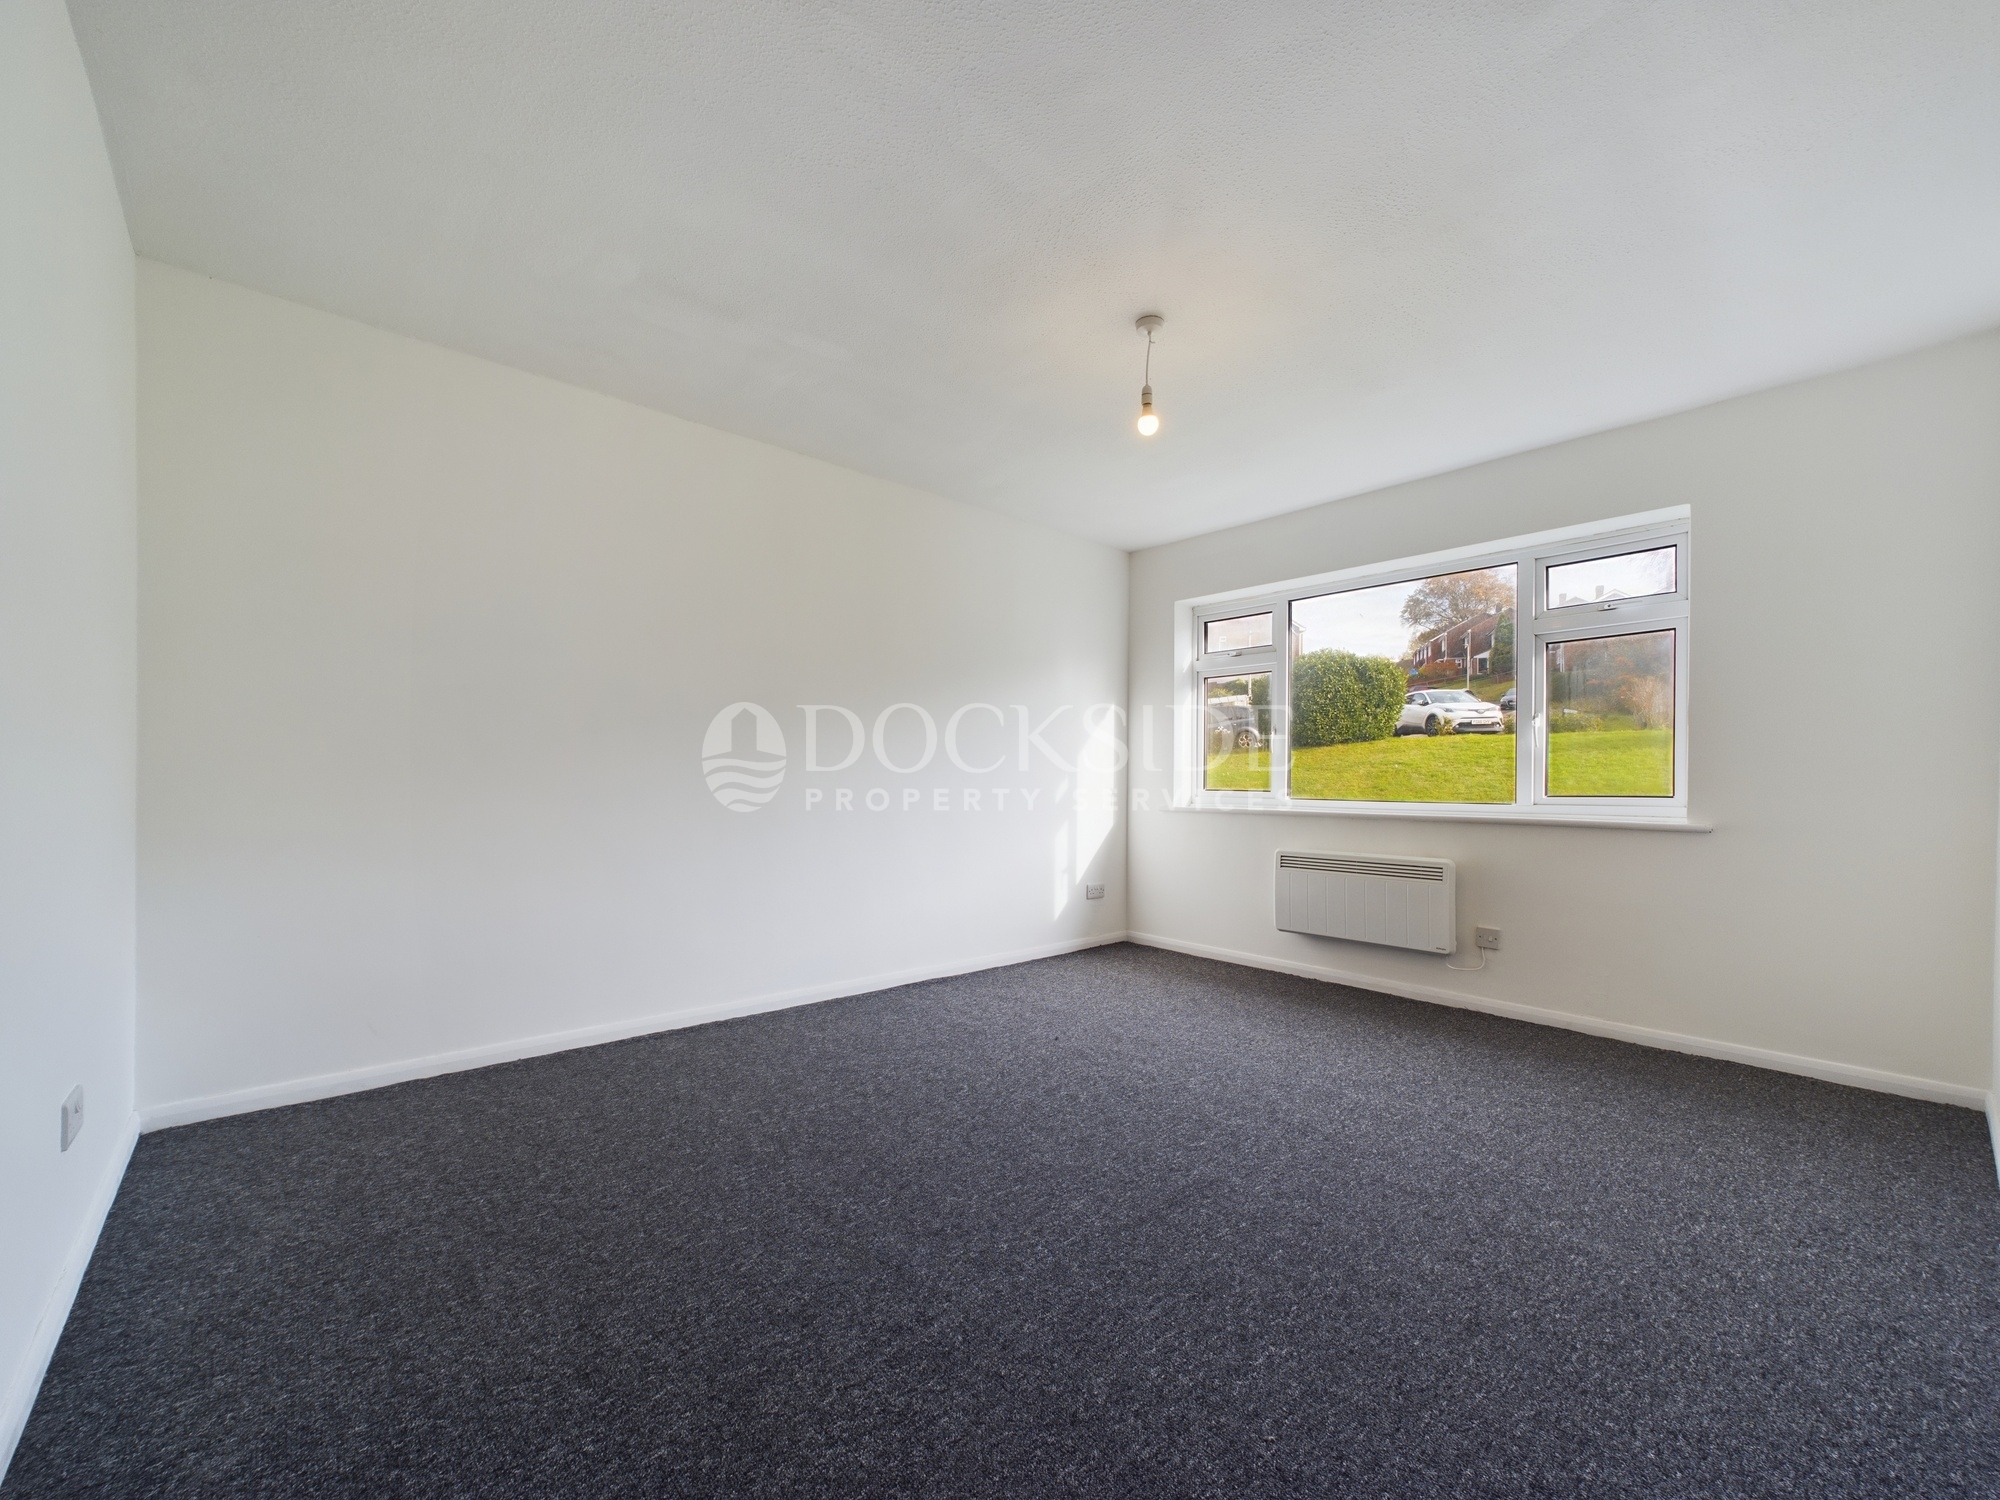 2 bed flat to rent in Wetheral Drive, Chatham  - Property Image 3